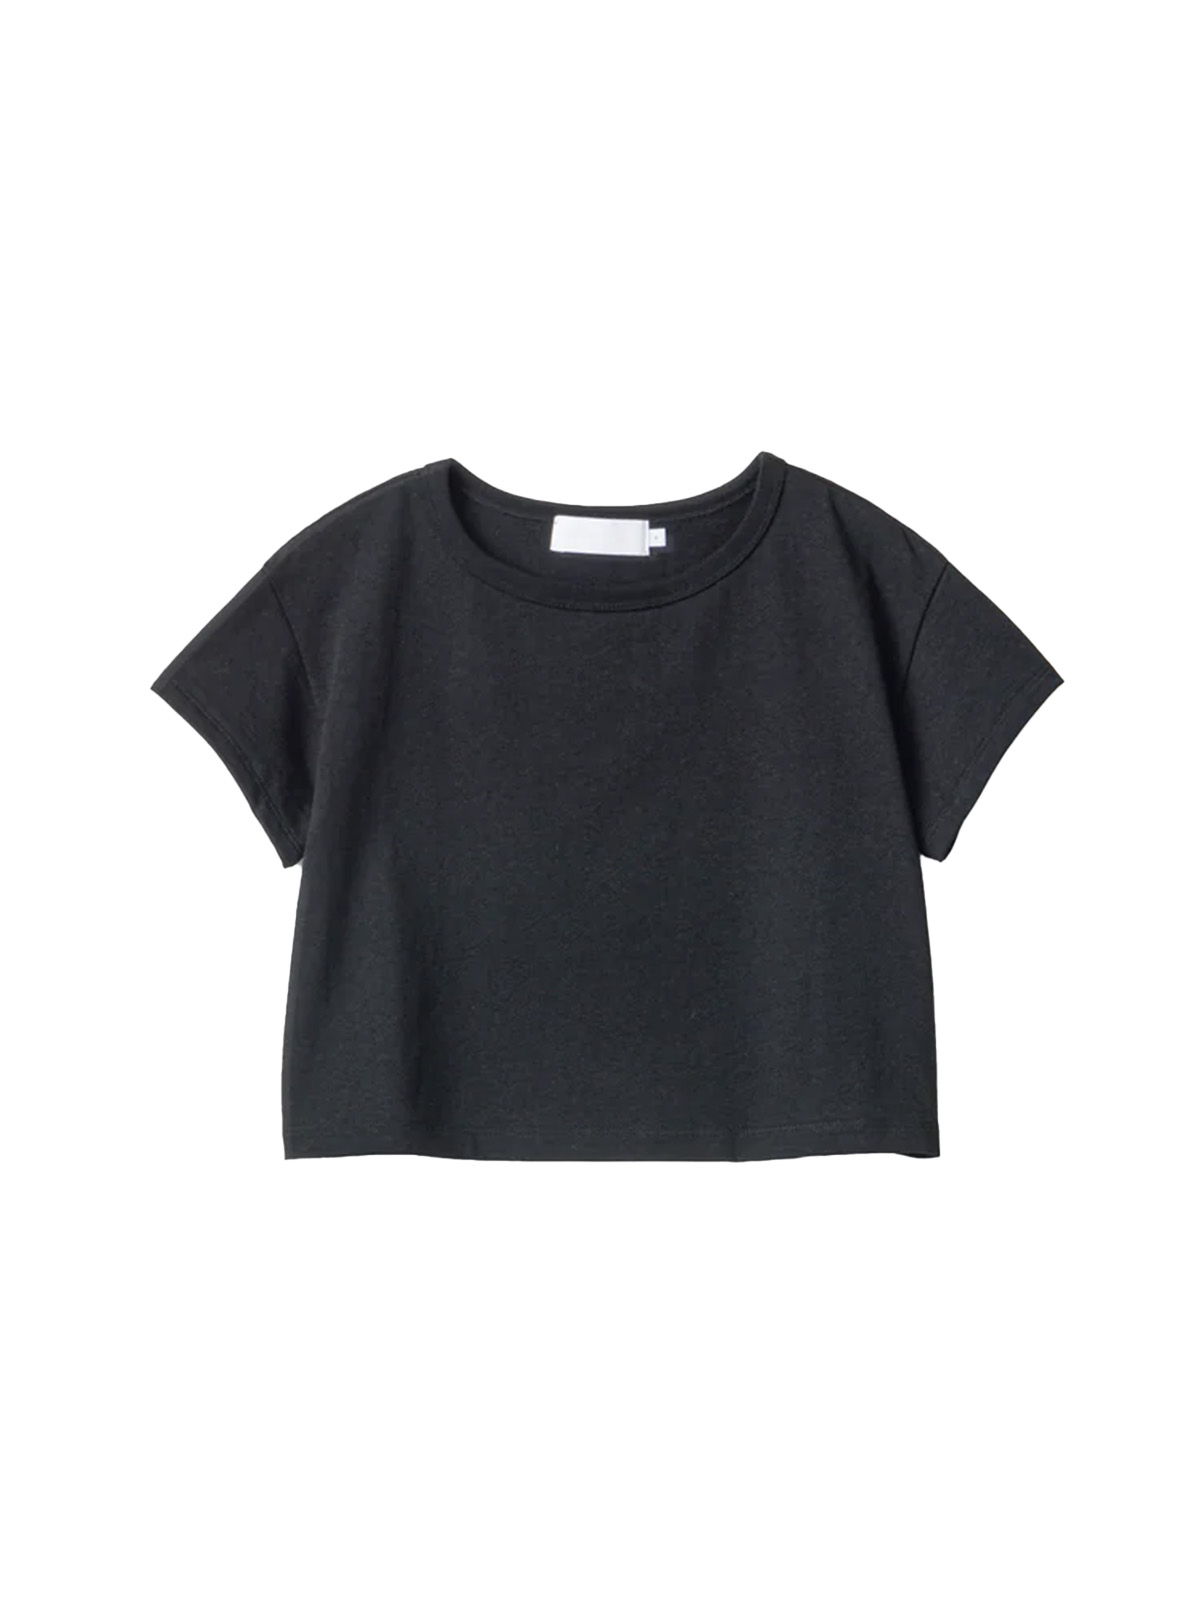 RECYCLED COTTON JERSEY COMPACT TEE (BLACK)